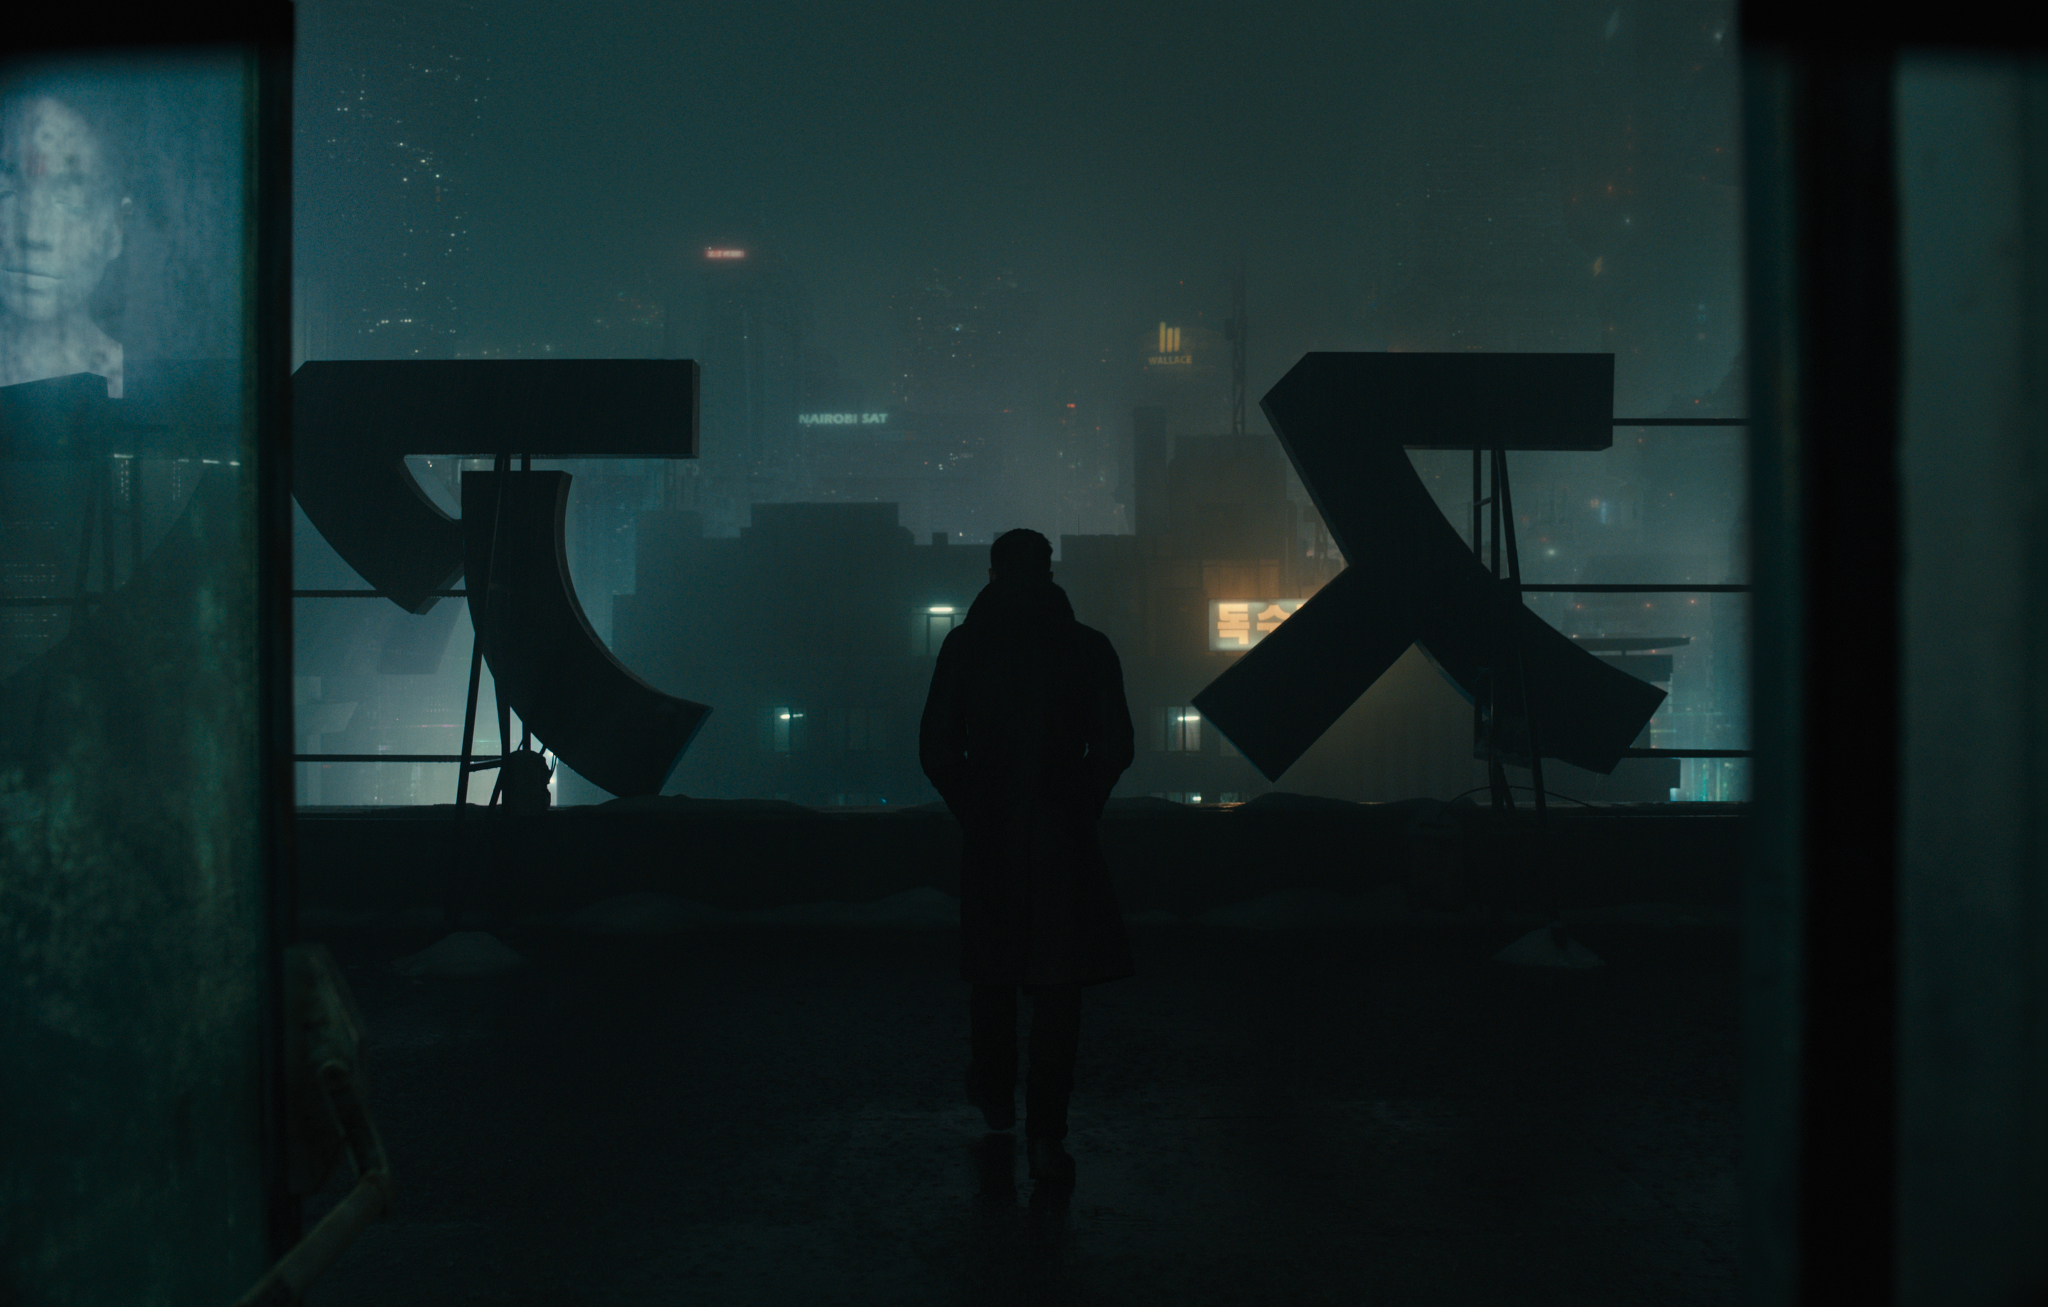 Blade Runner 2049 Backgrounds, Pictures, Images